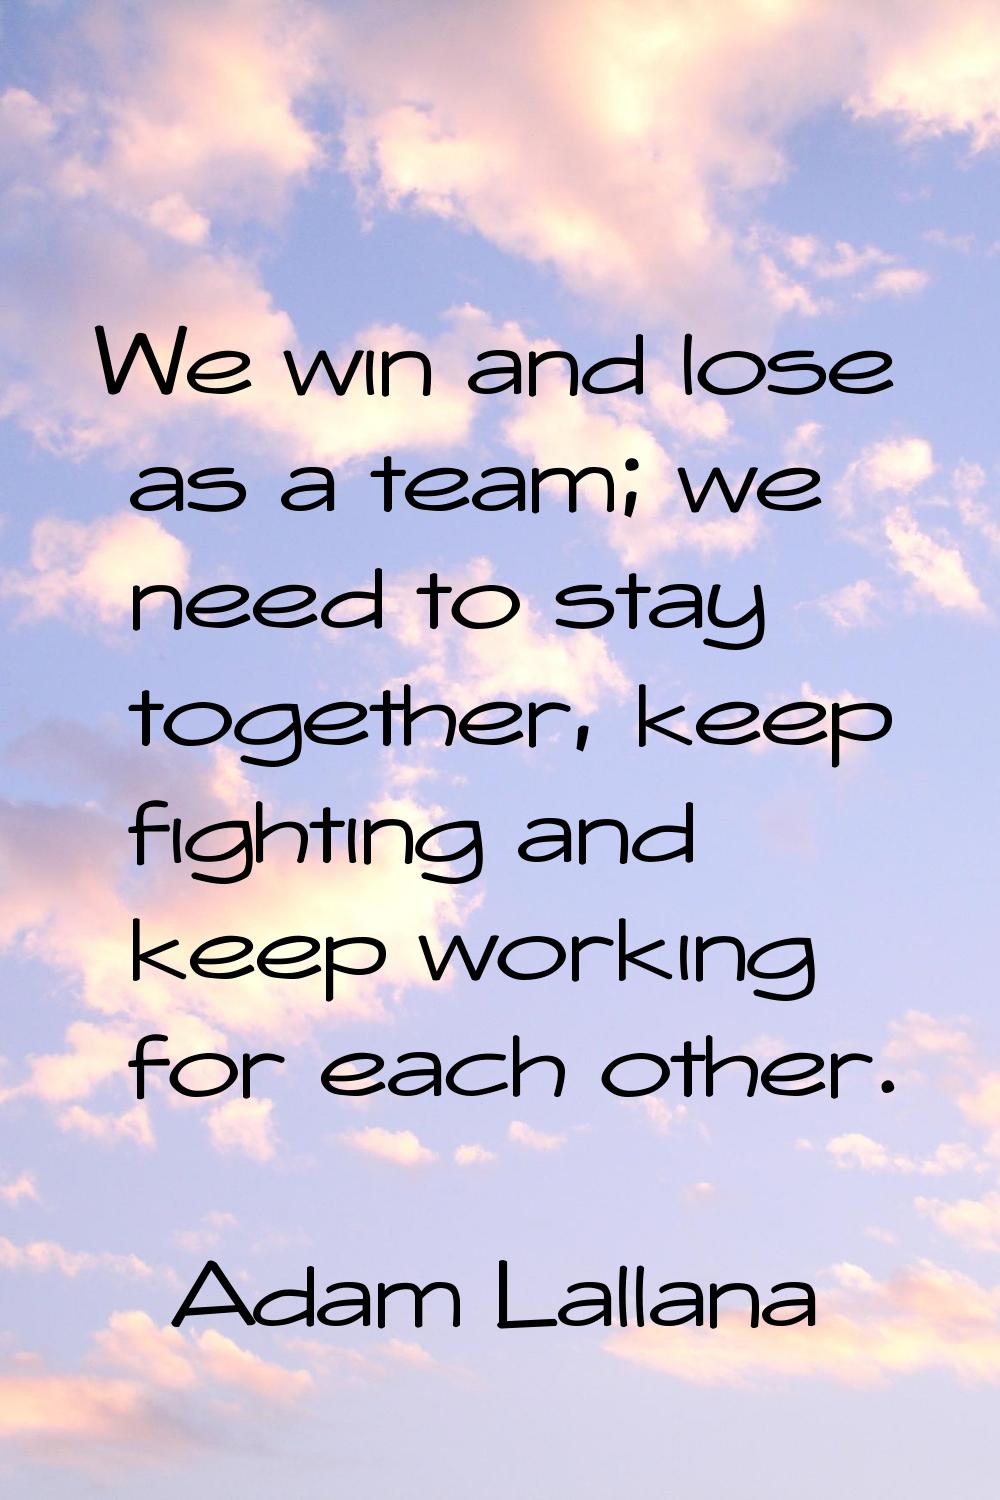 We win and lose as a team; we need to stay together, keep fighting and keep working for each other.